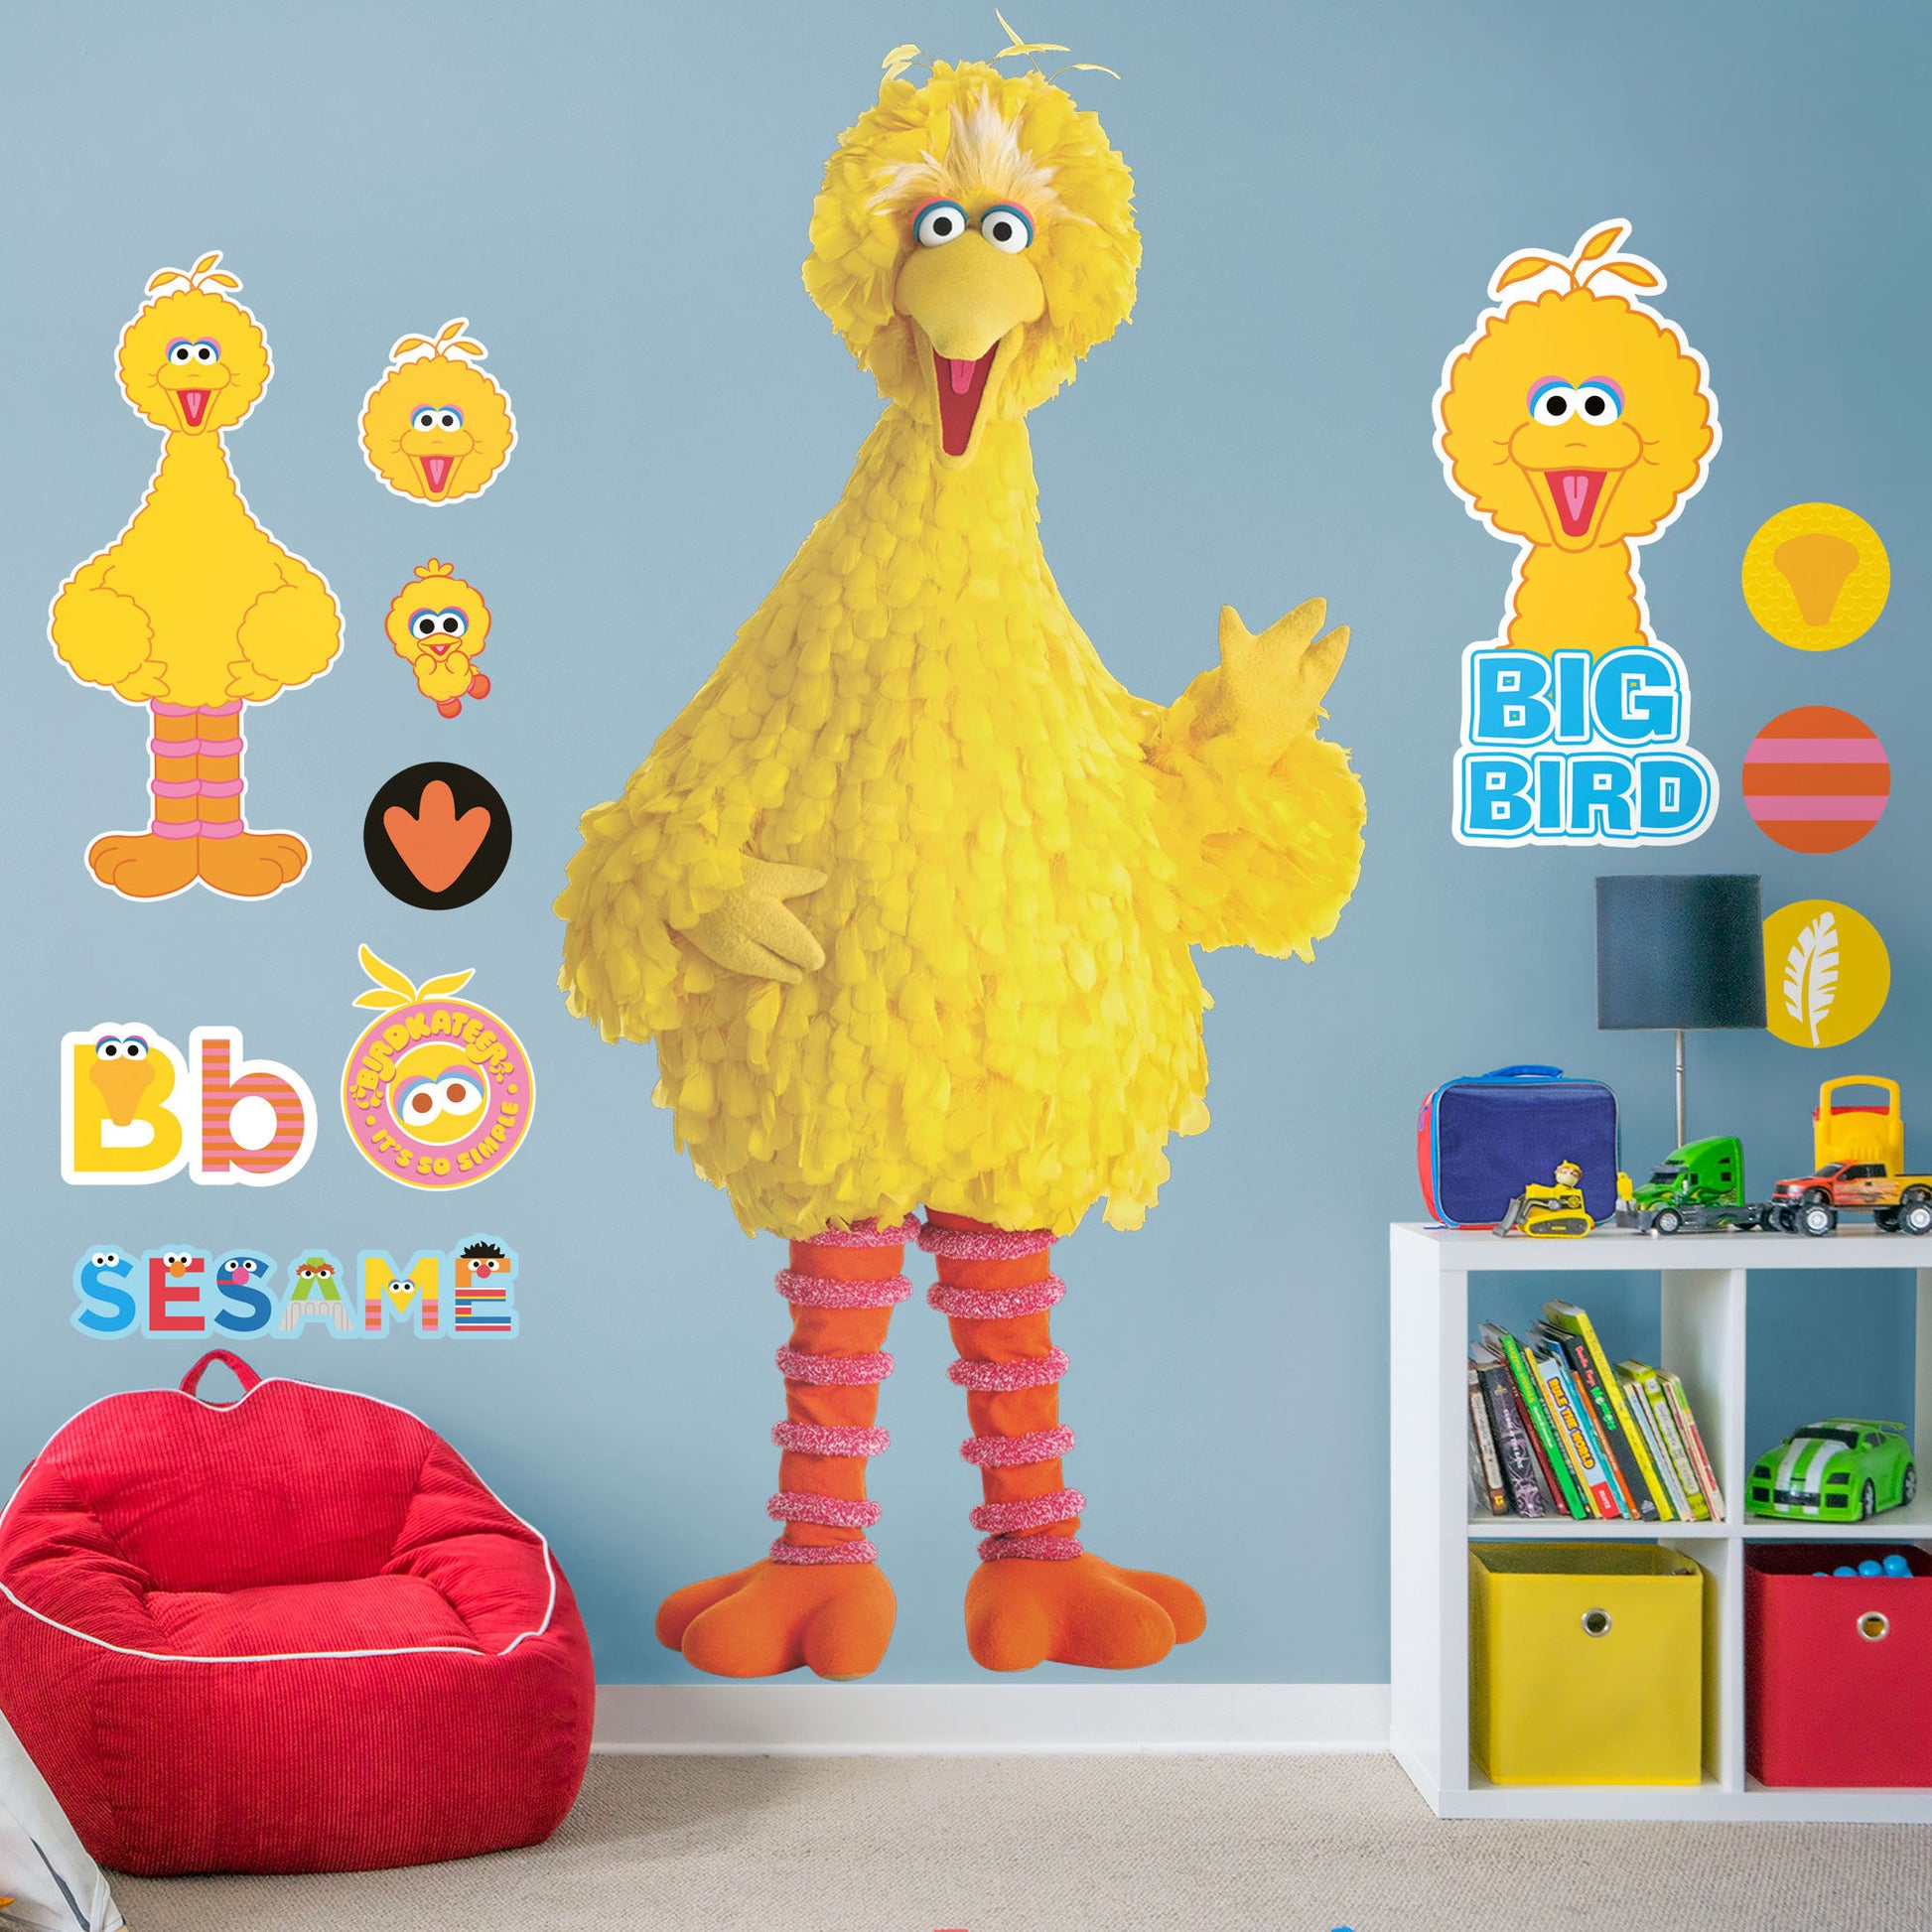 Life-Size Character + 11 Licensed Decals (45"W x 92"H)